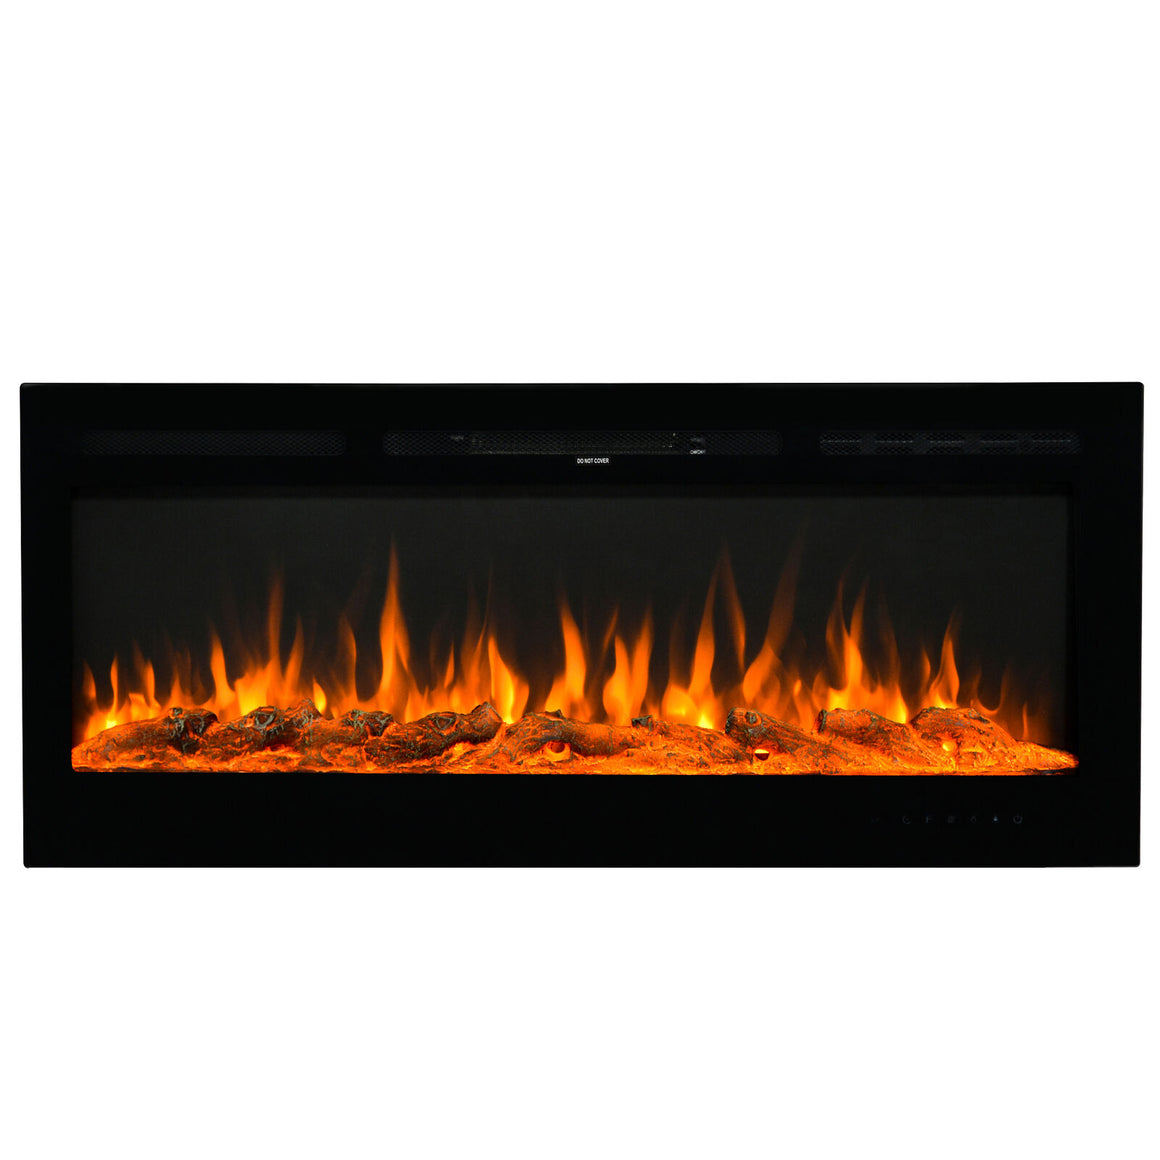 U-style Wall-Mounted Recessed Electronic 50" Fireplace w/ 9 Color Flame Crystal and Log